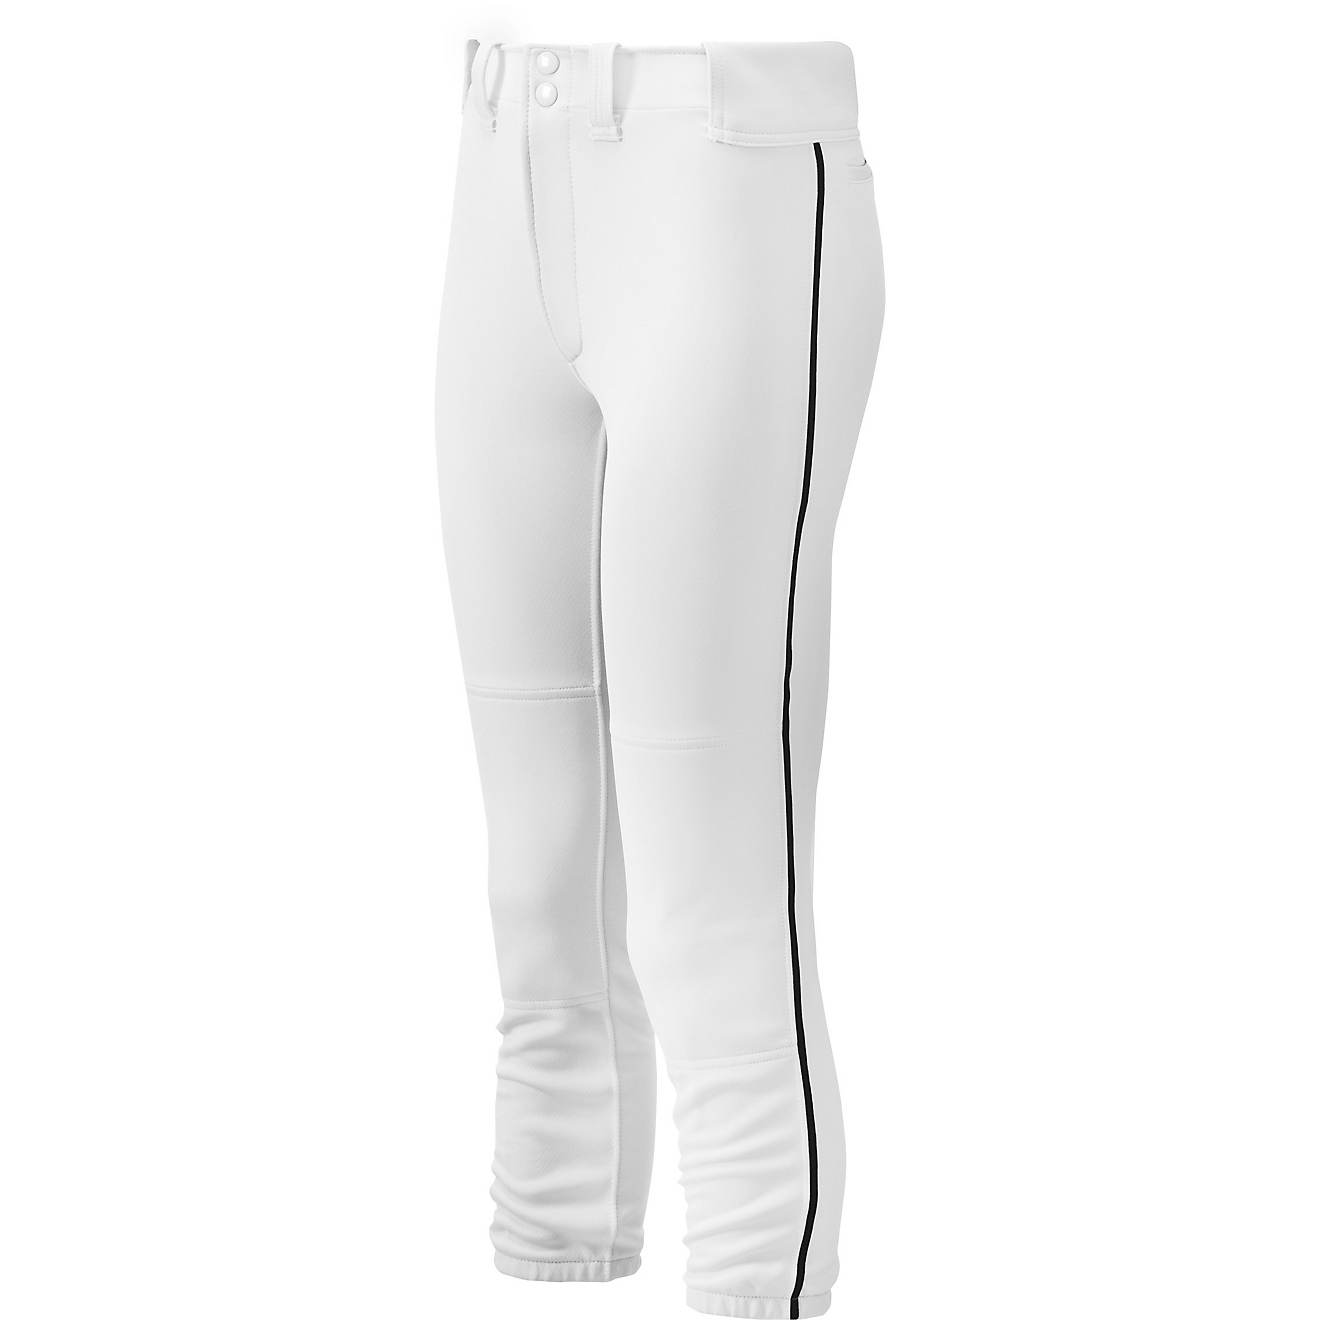 Mizuno Women's Select Belted Piped Pant